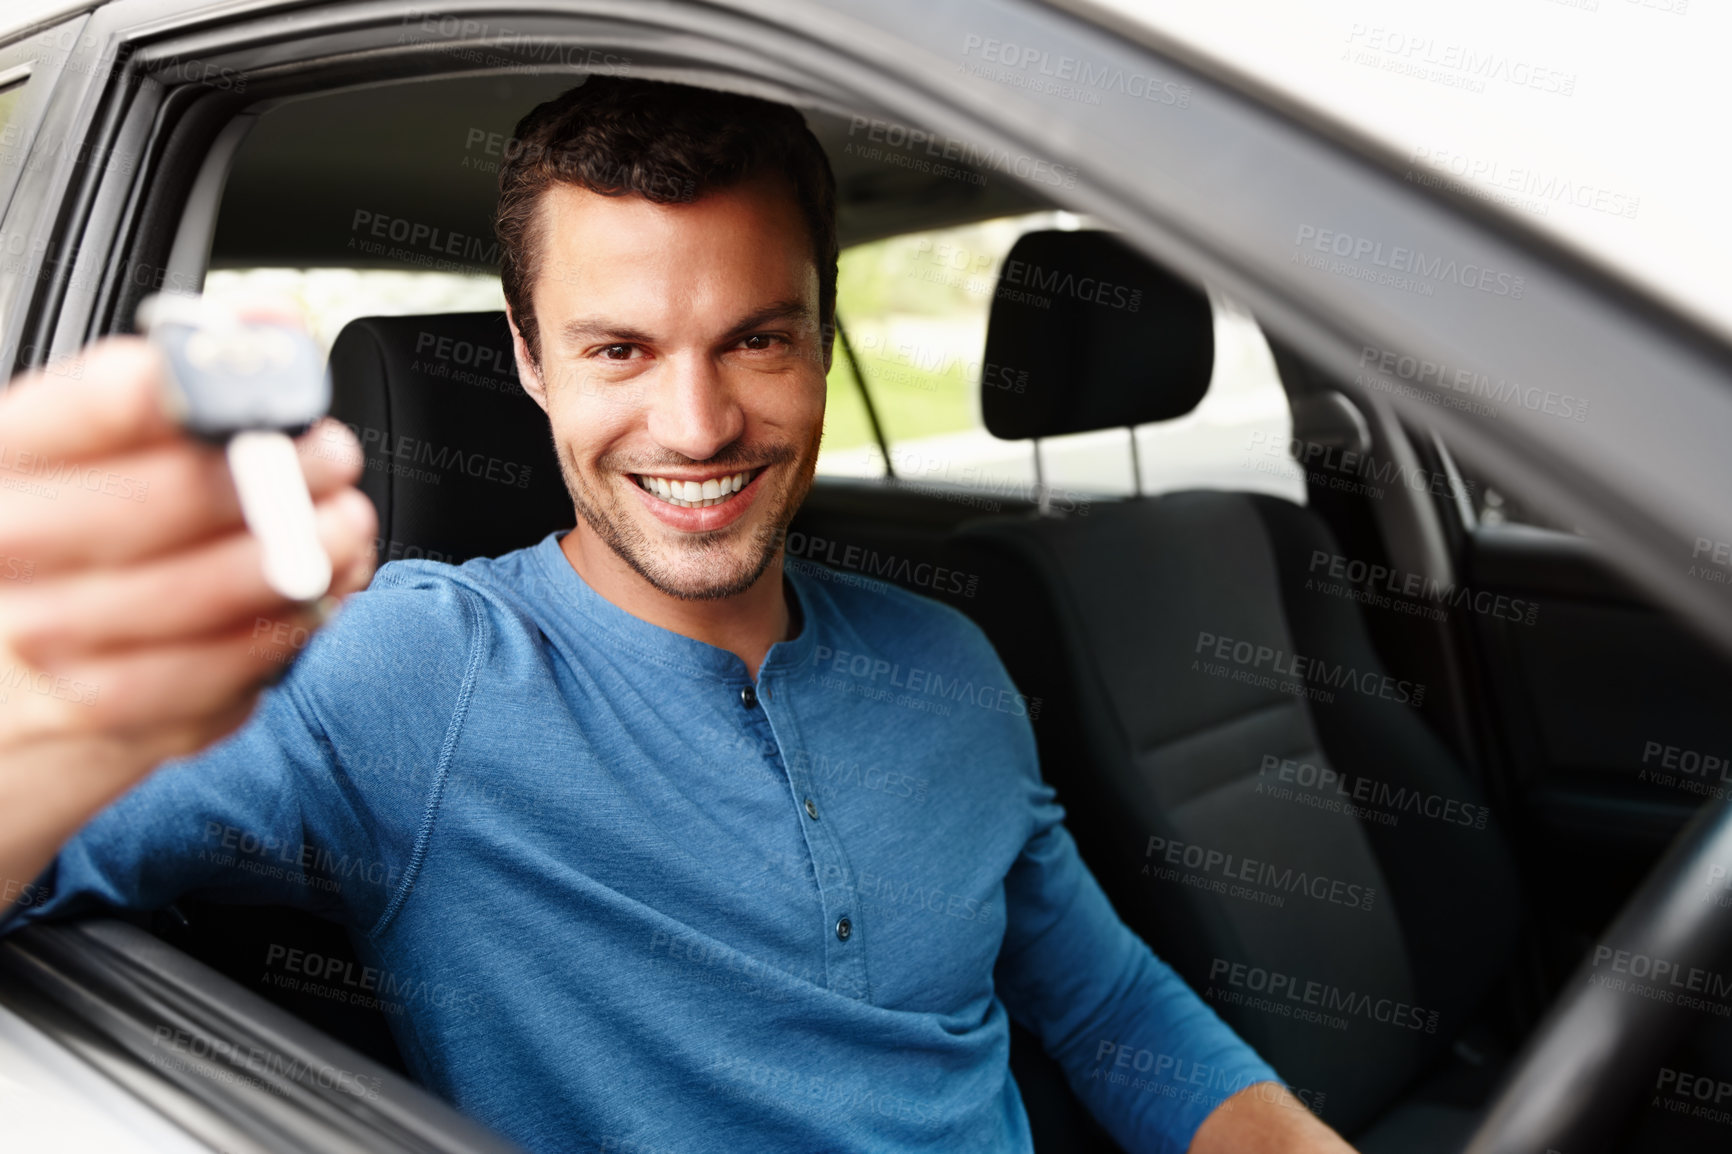 Buy stock photo Smiling male sitting in his car holding up his car keys